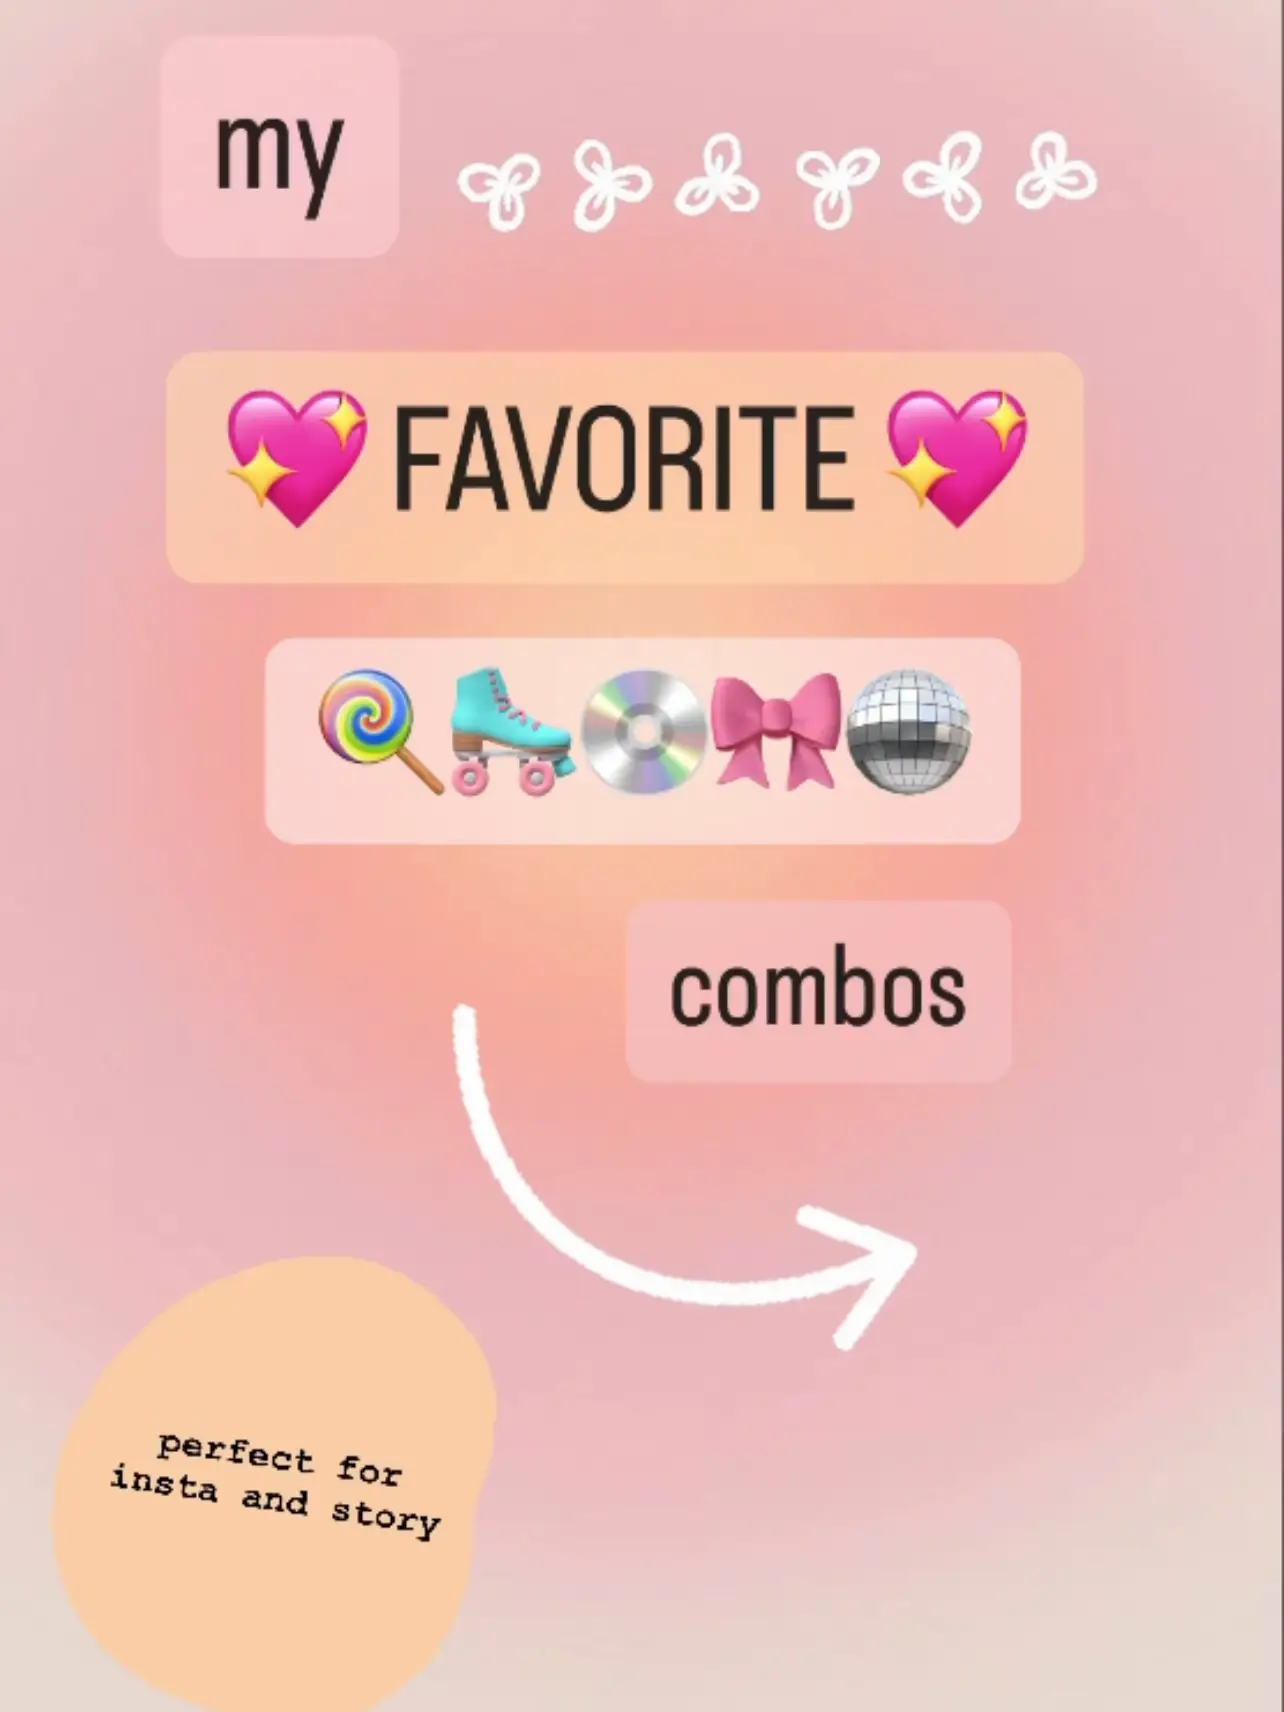 Post by ✩ ₊˚ 🌊 in Gacha Cute Pc comments 